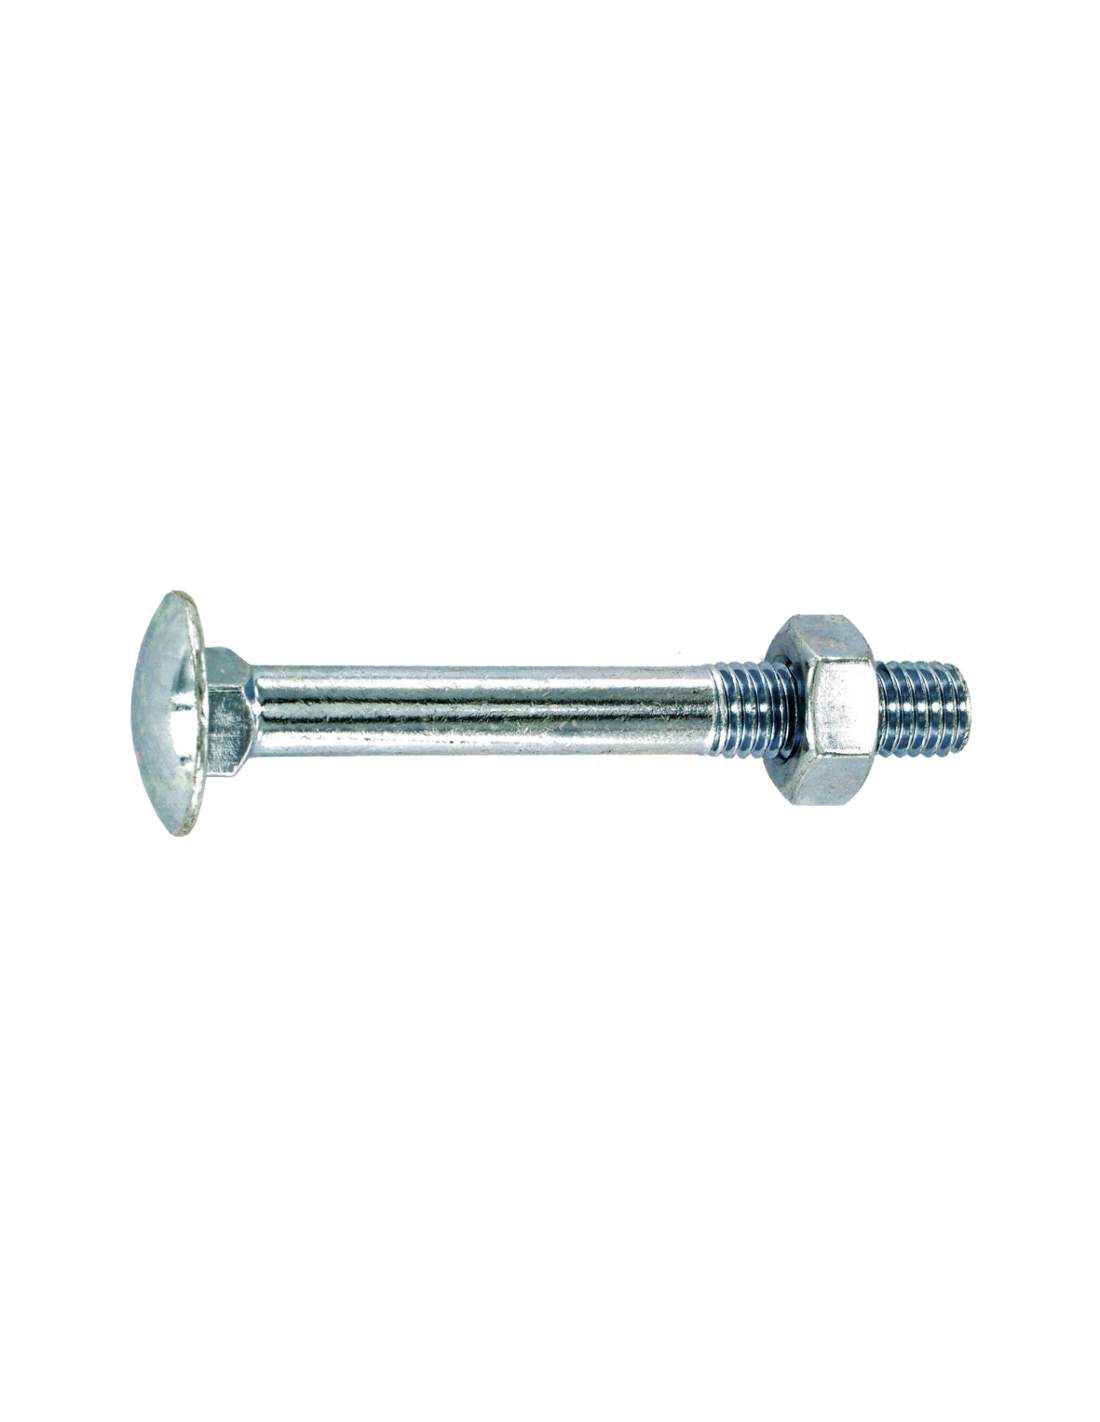 Zinc-plated steel round-head bolt with square collar 8x100mm, 3 pcs.